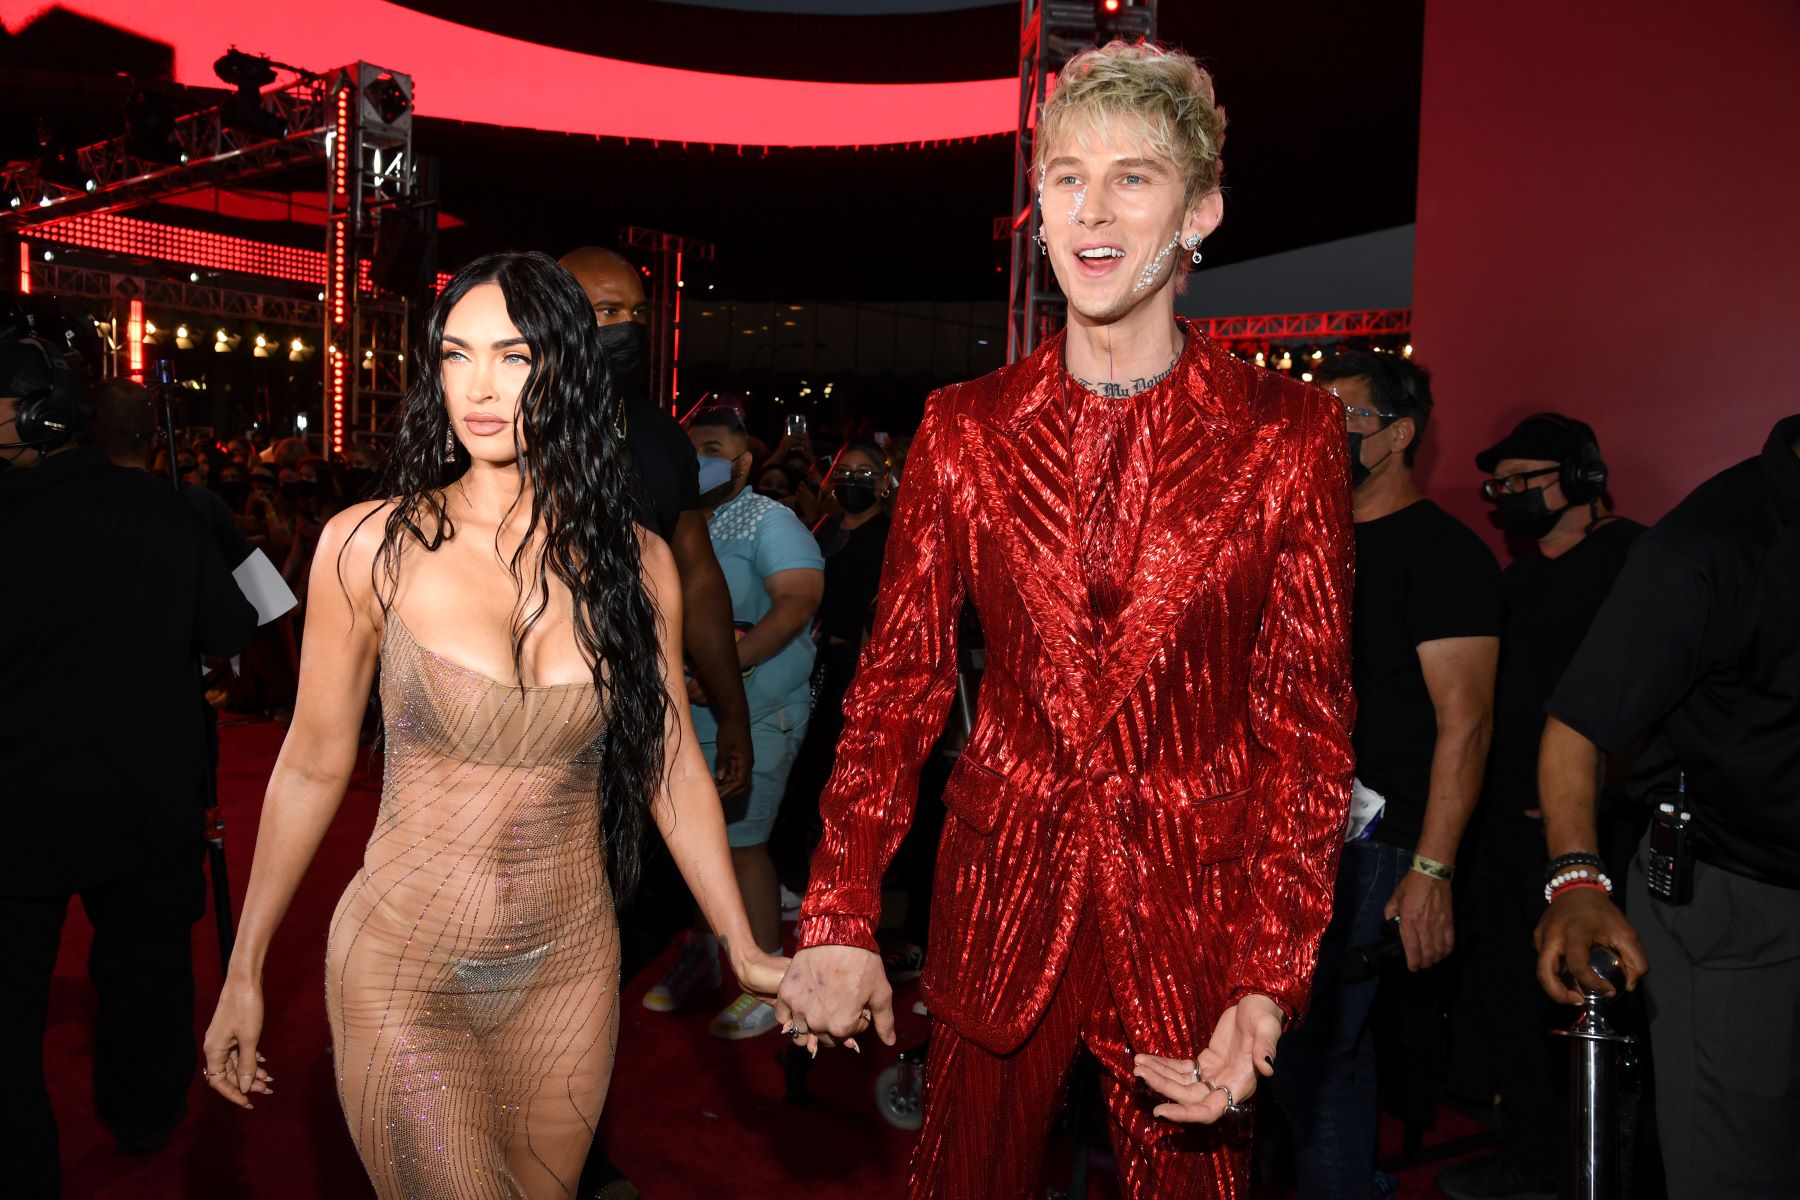 Megan Fox and Machine Gun Kelly at the 2021 MTV Video Music Awards at the Barclays Center in New York City